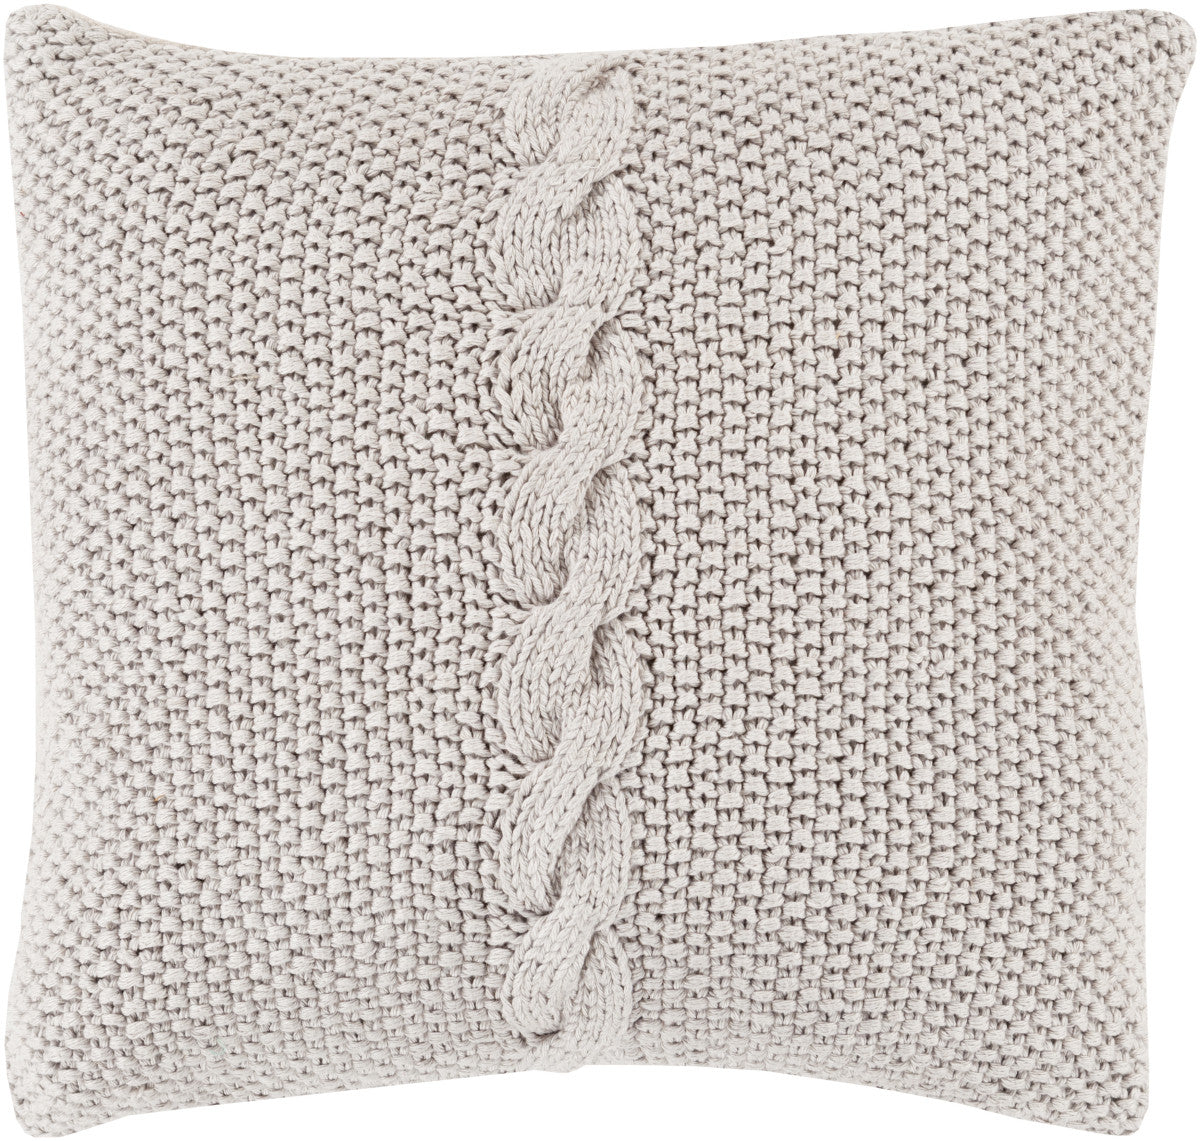 Surya Genevieve Classic Cable Knit GN-002 Pillow